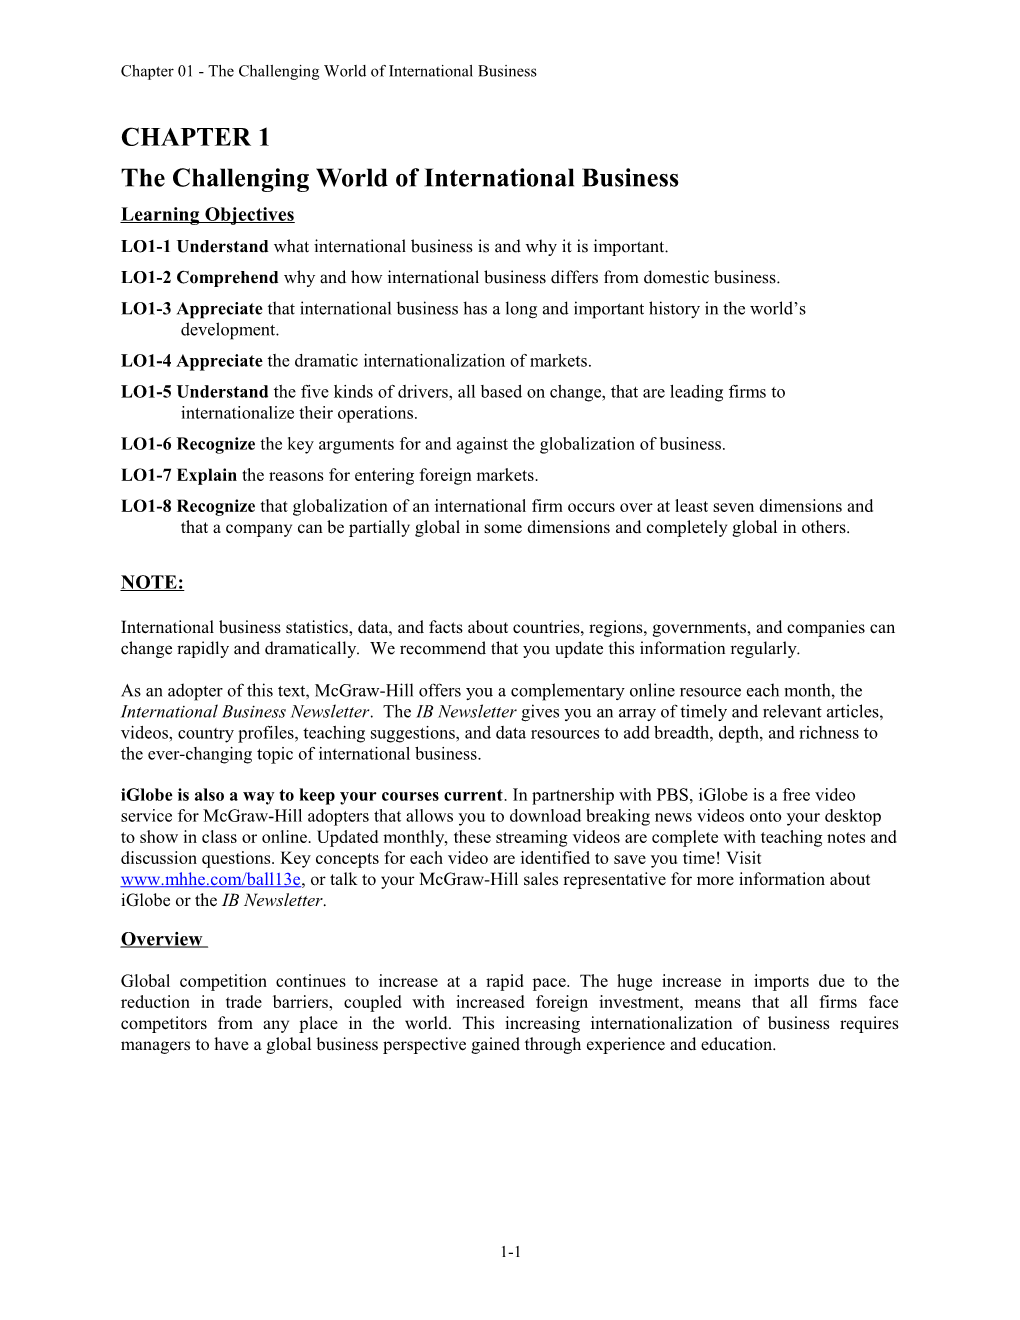 Ball 13E CHAPTER 1 Challenging World of IB